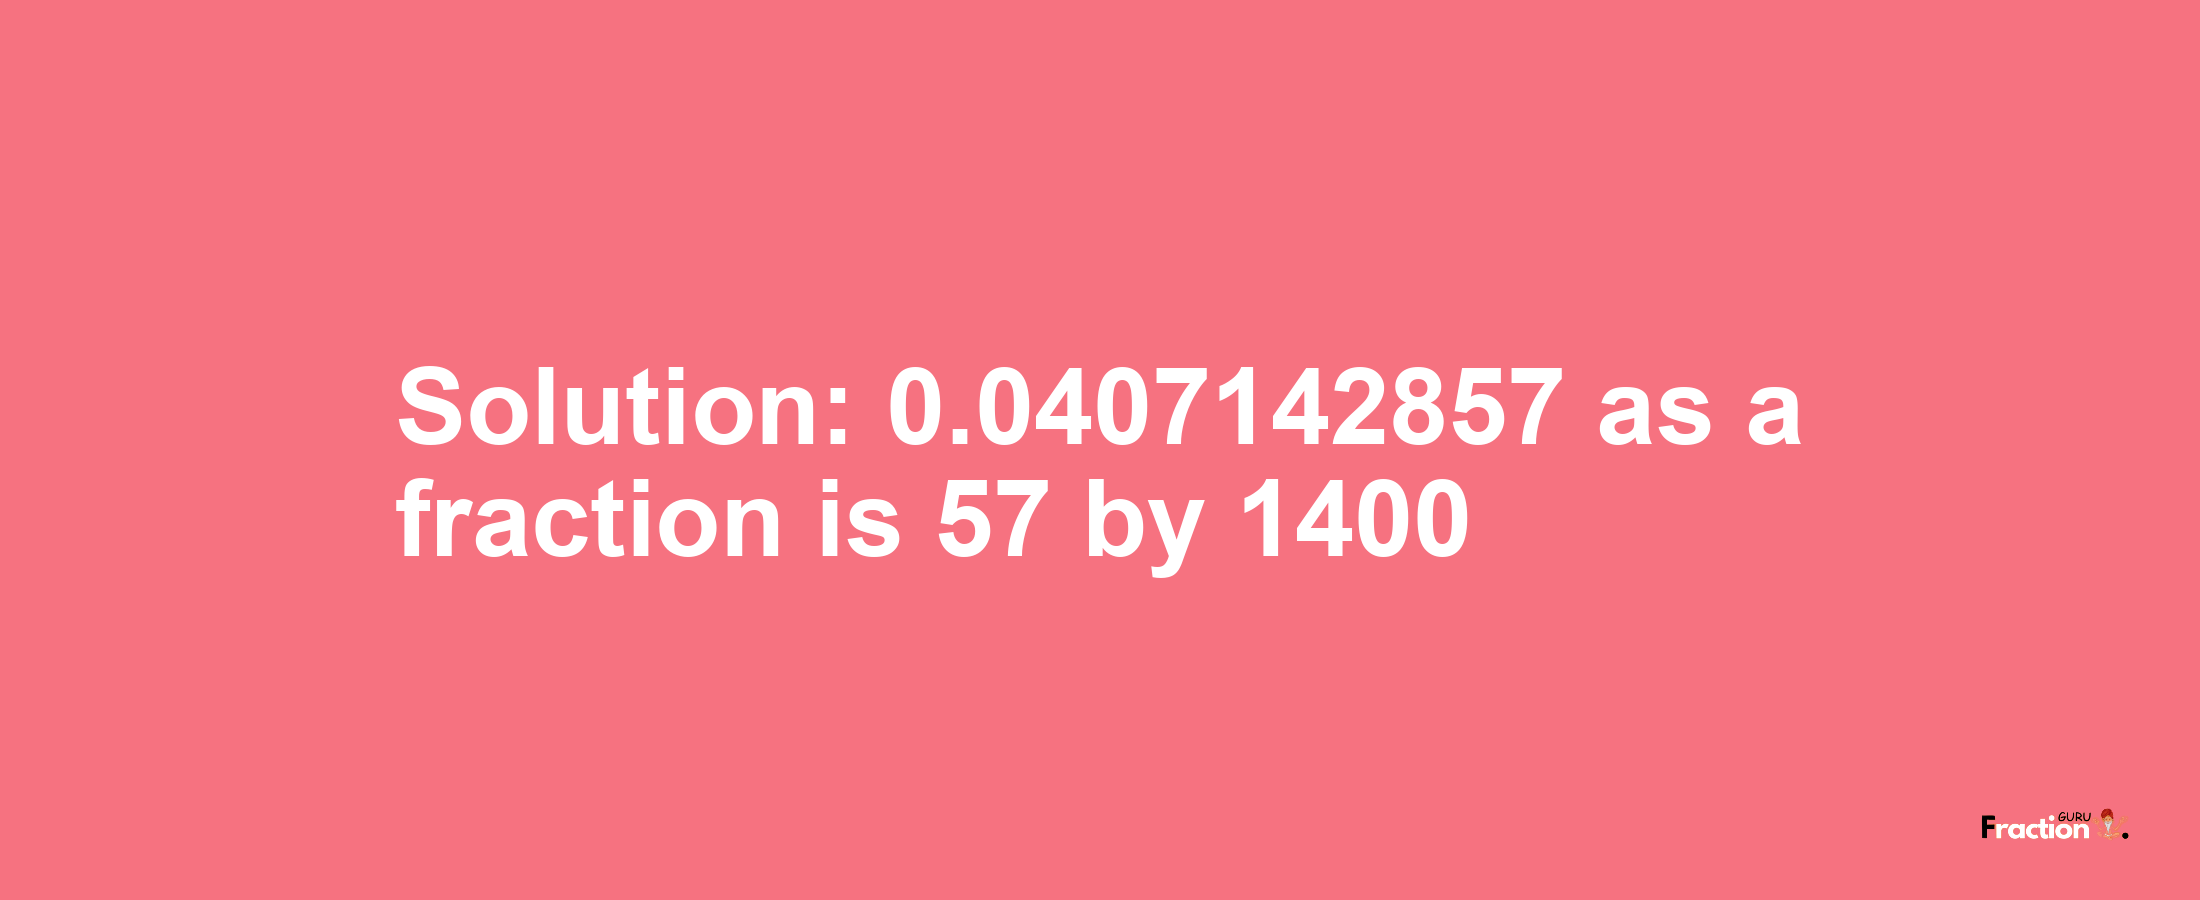 Solution:0.0407142857 as a fraction is 57/1400